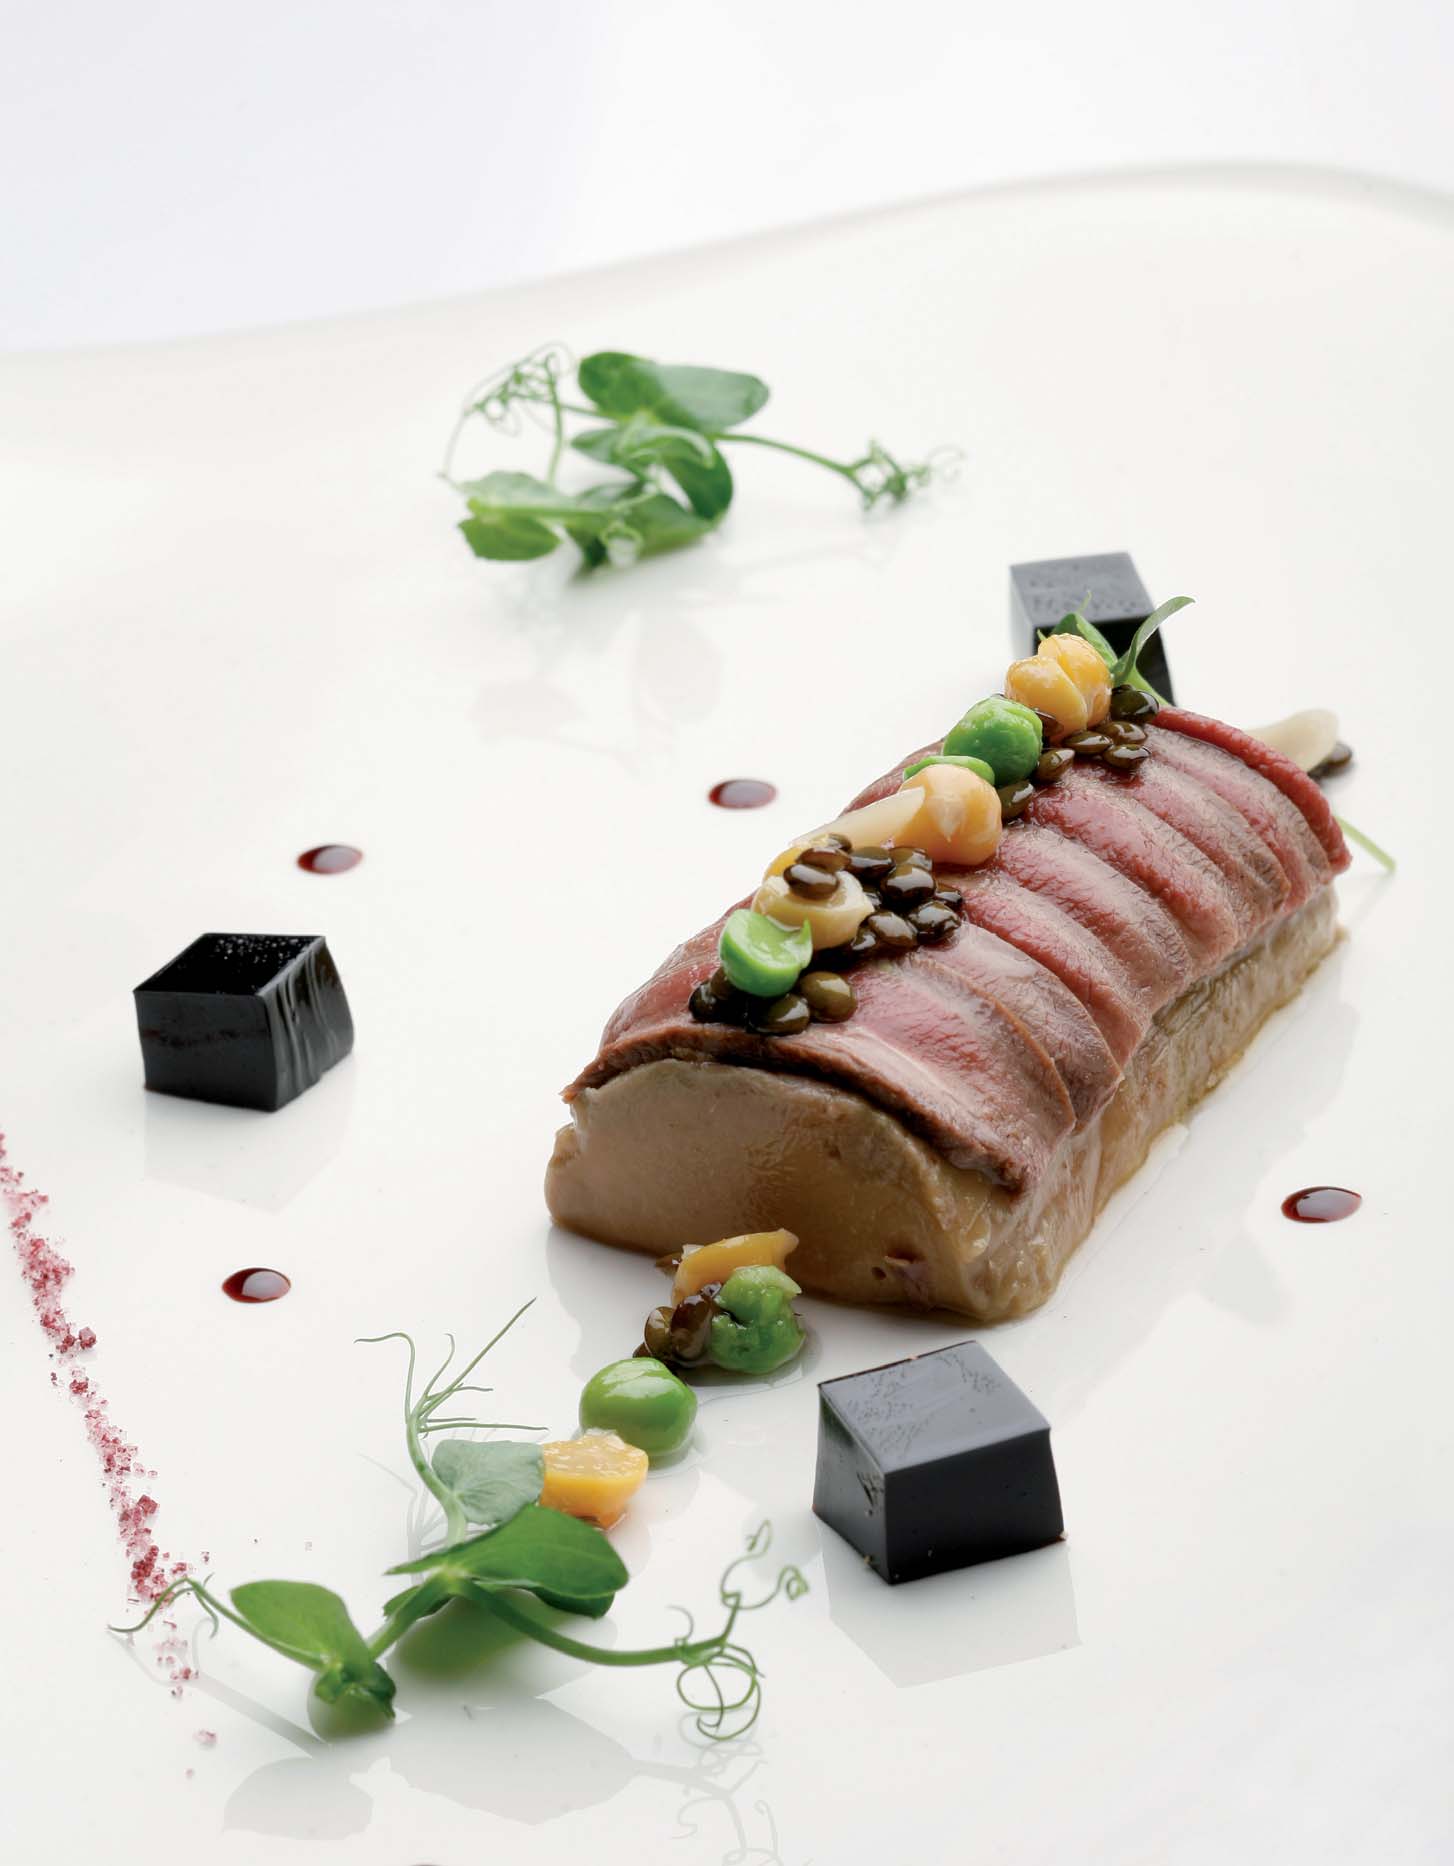 Smoked pigeon and foie gras with fine sea salt with hibiscus flower, legumes vinaigrette and Palo de Mallorca jelly - Recipes - Gastronomy - Balearic Islands - Agrifoodstuffs, designations of origin and Balearic gastronomy